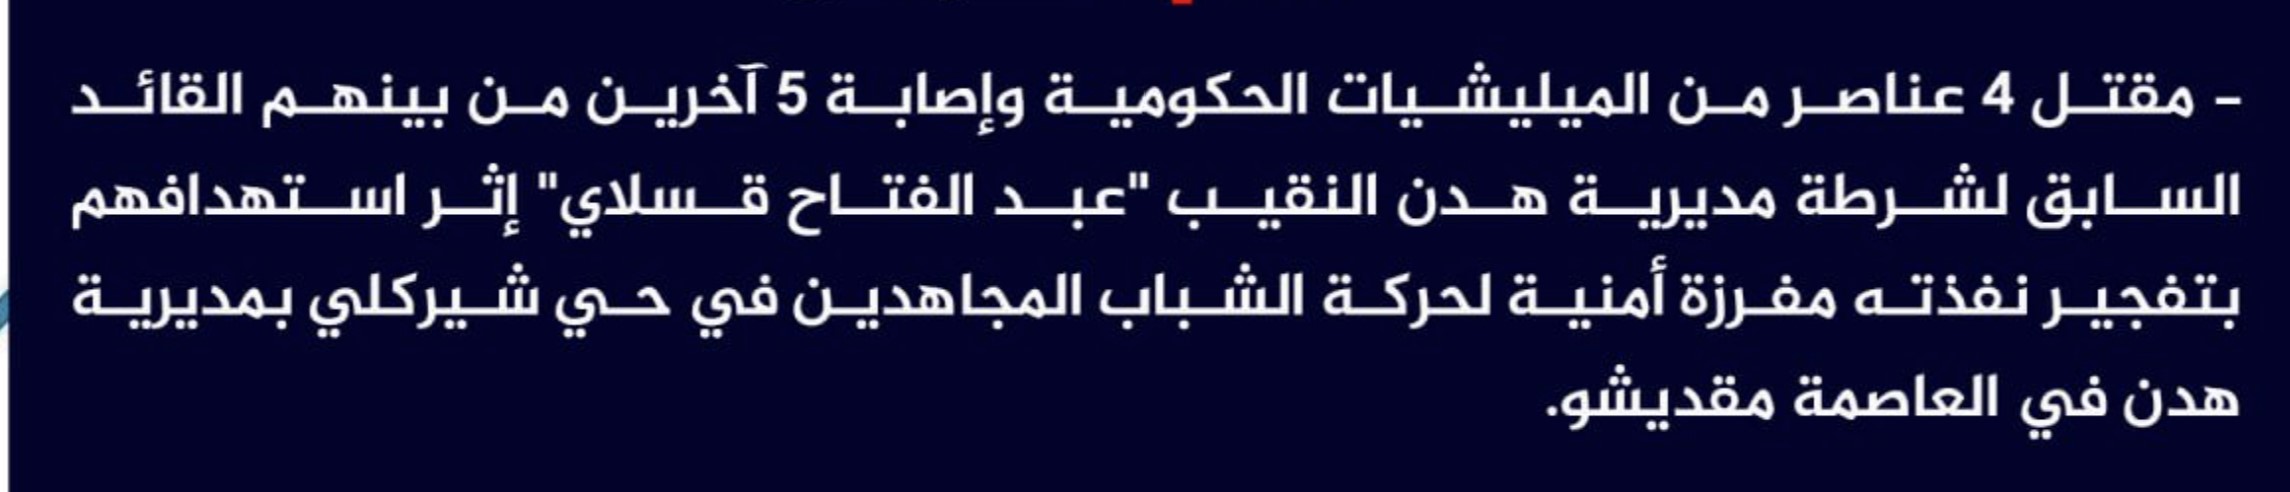 (Claim) al-Shabaab Killed Four Somalian Forces and Injured Five Others, Including the Former Commander of Hodan Named Captain Abdel Fatah Qaslay, in an IED Attack in Shirkley, Hodan District, Mogadishu, Somalia - 6 June 2023